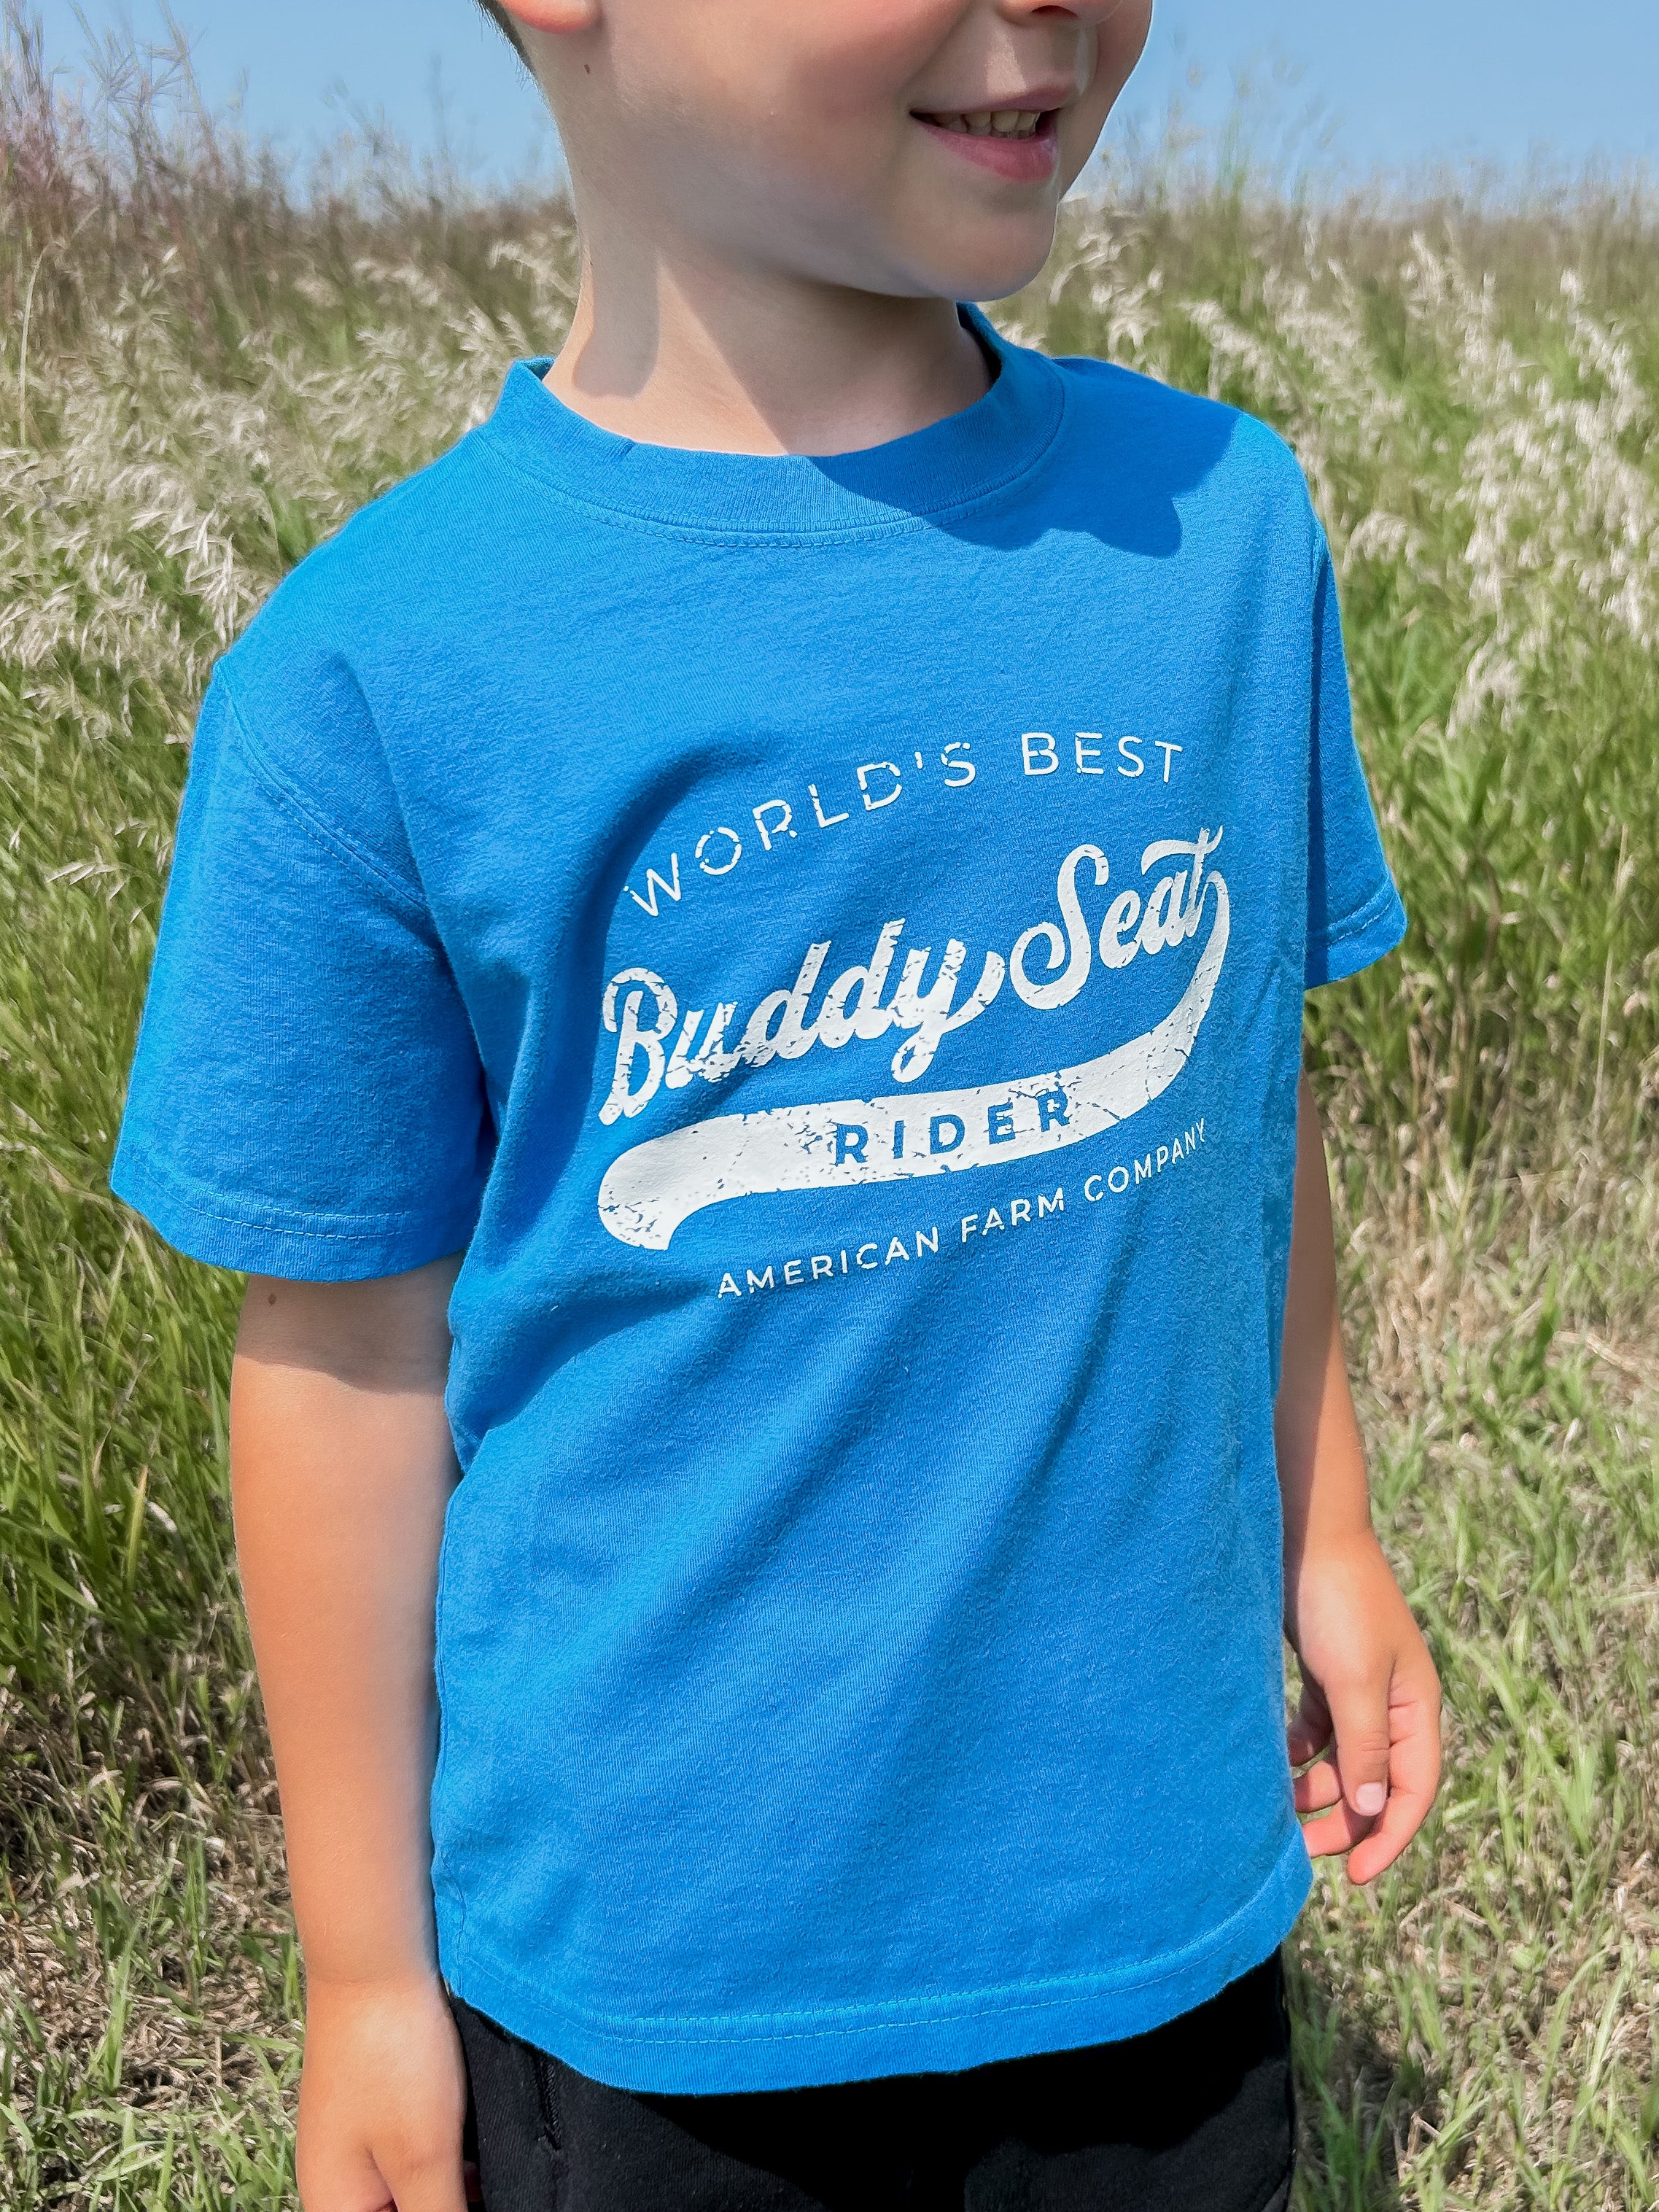 Buddy Seat Rider Blue Toddler/Youth Tee